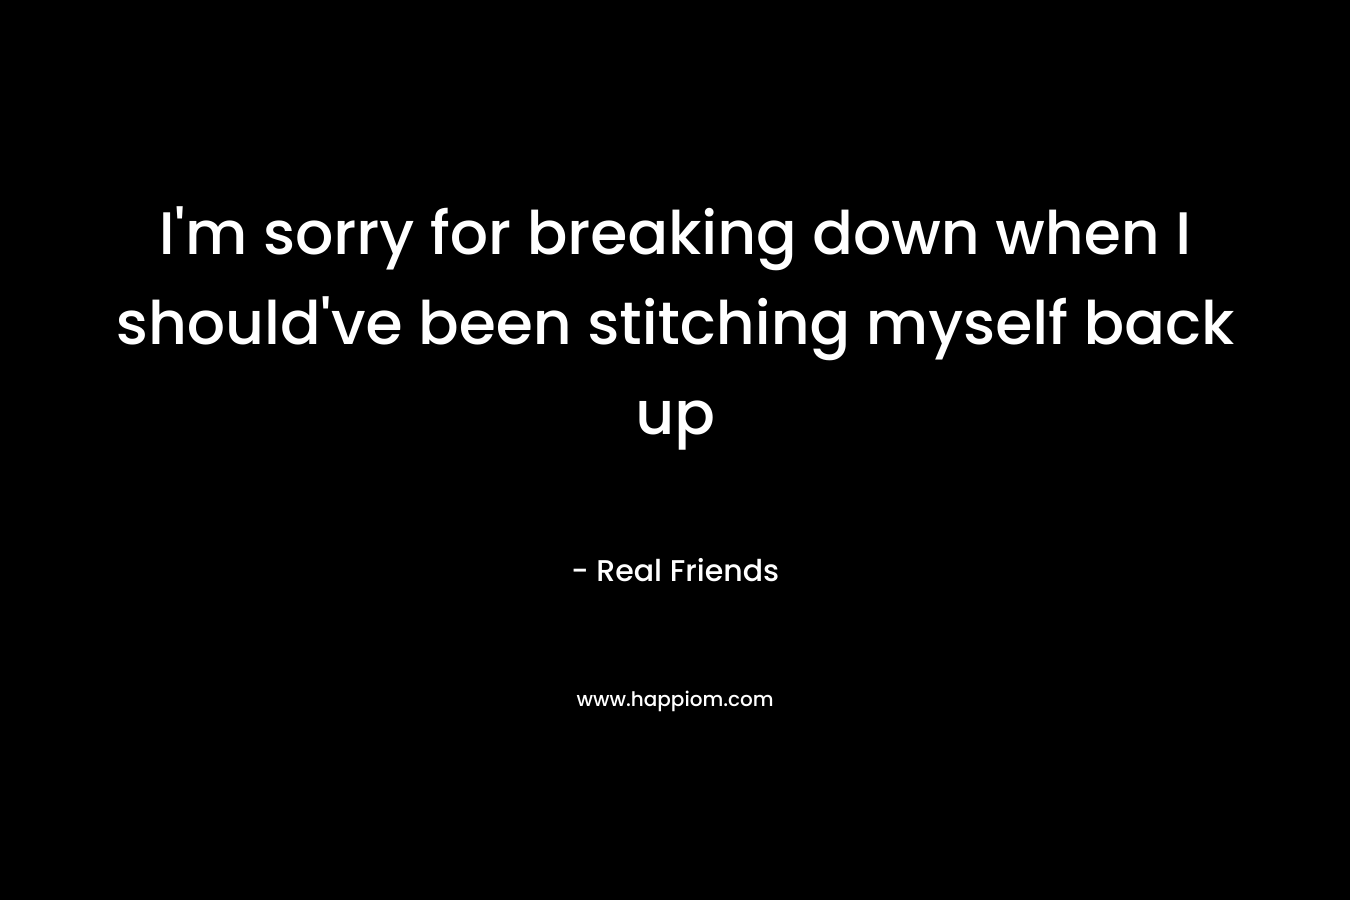 I'm sorry for breaking down when I should've been stitching myself back up